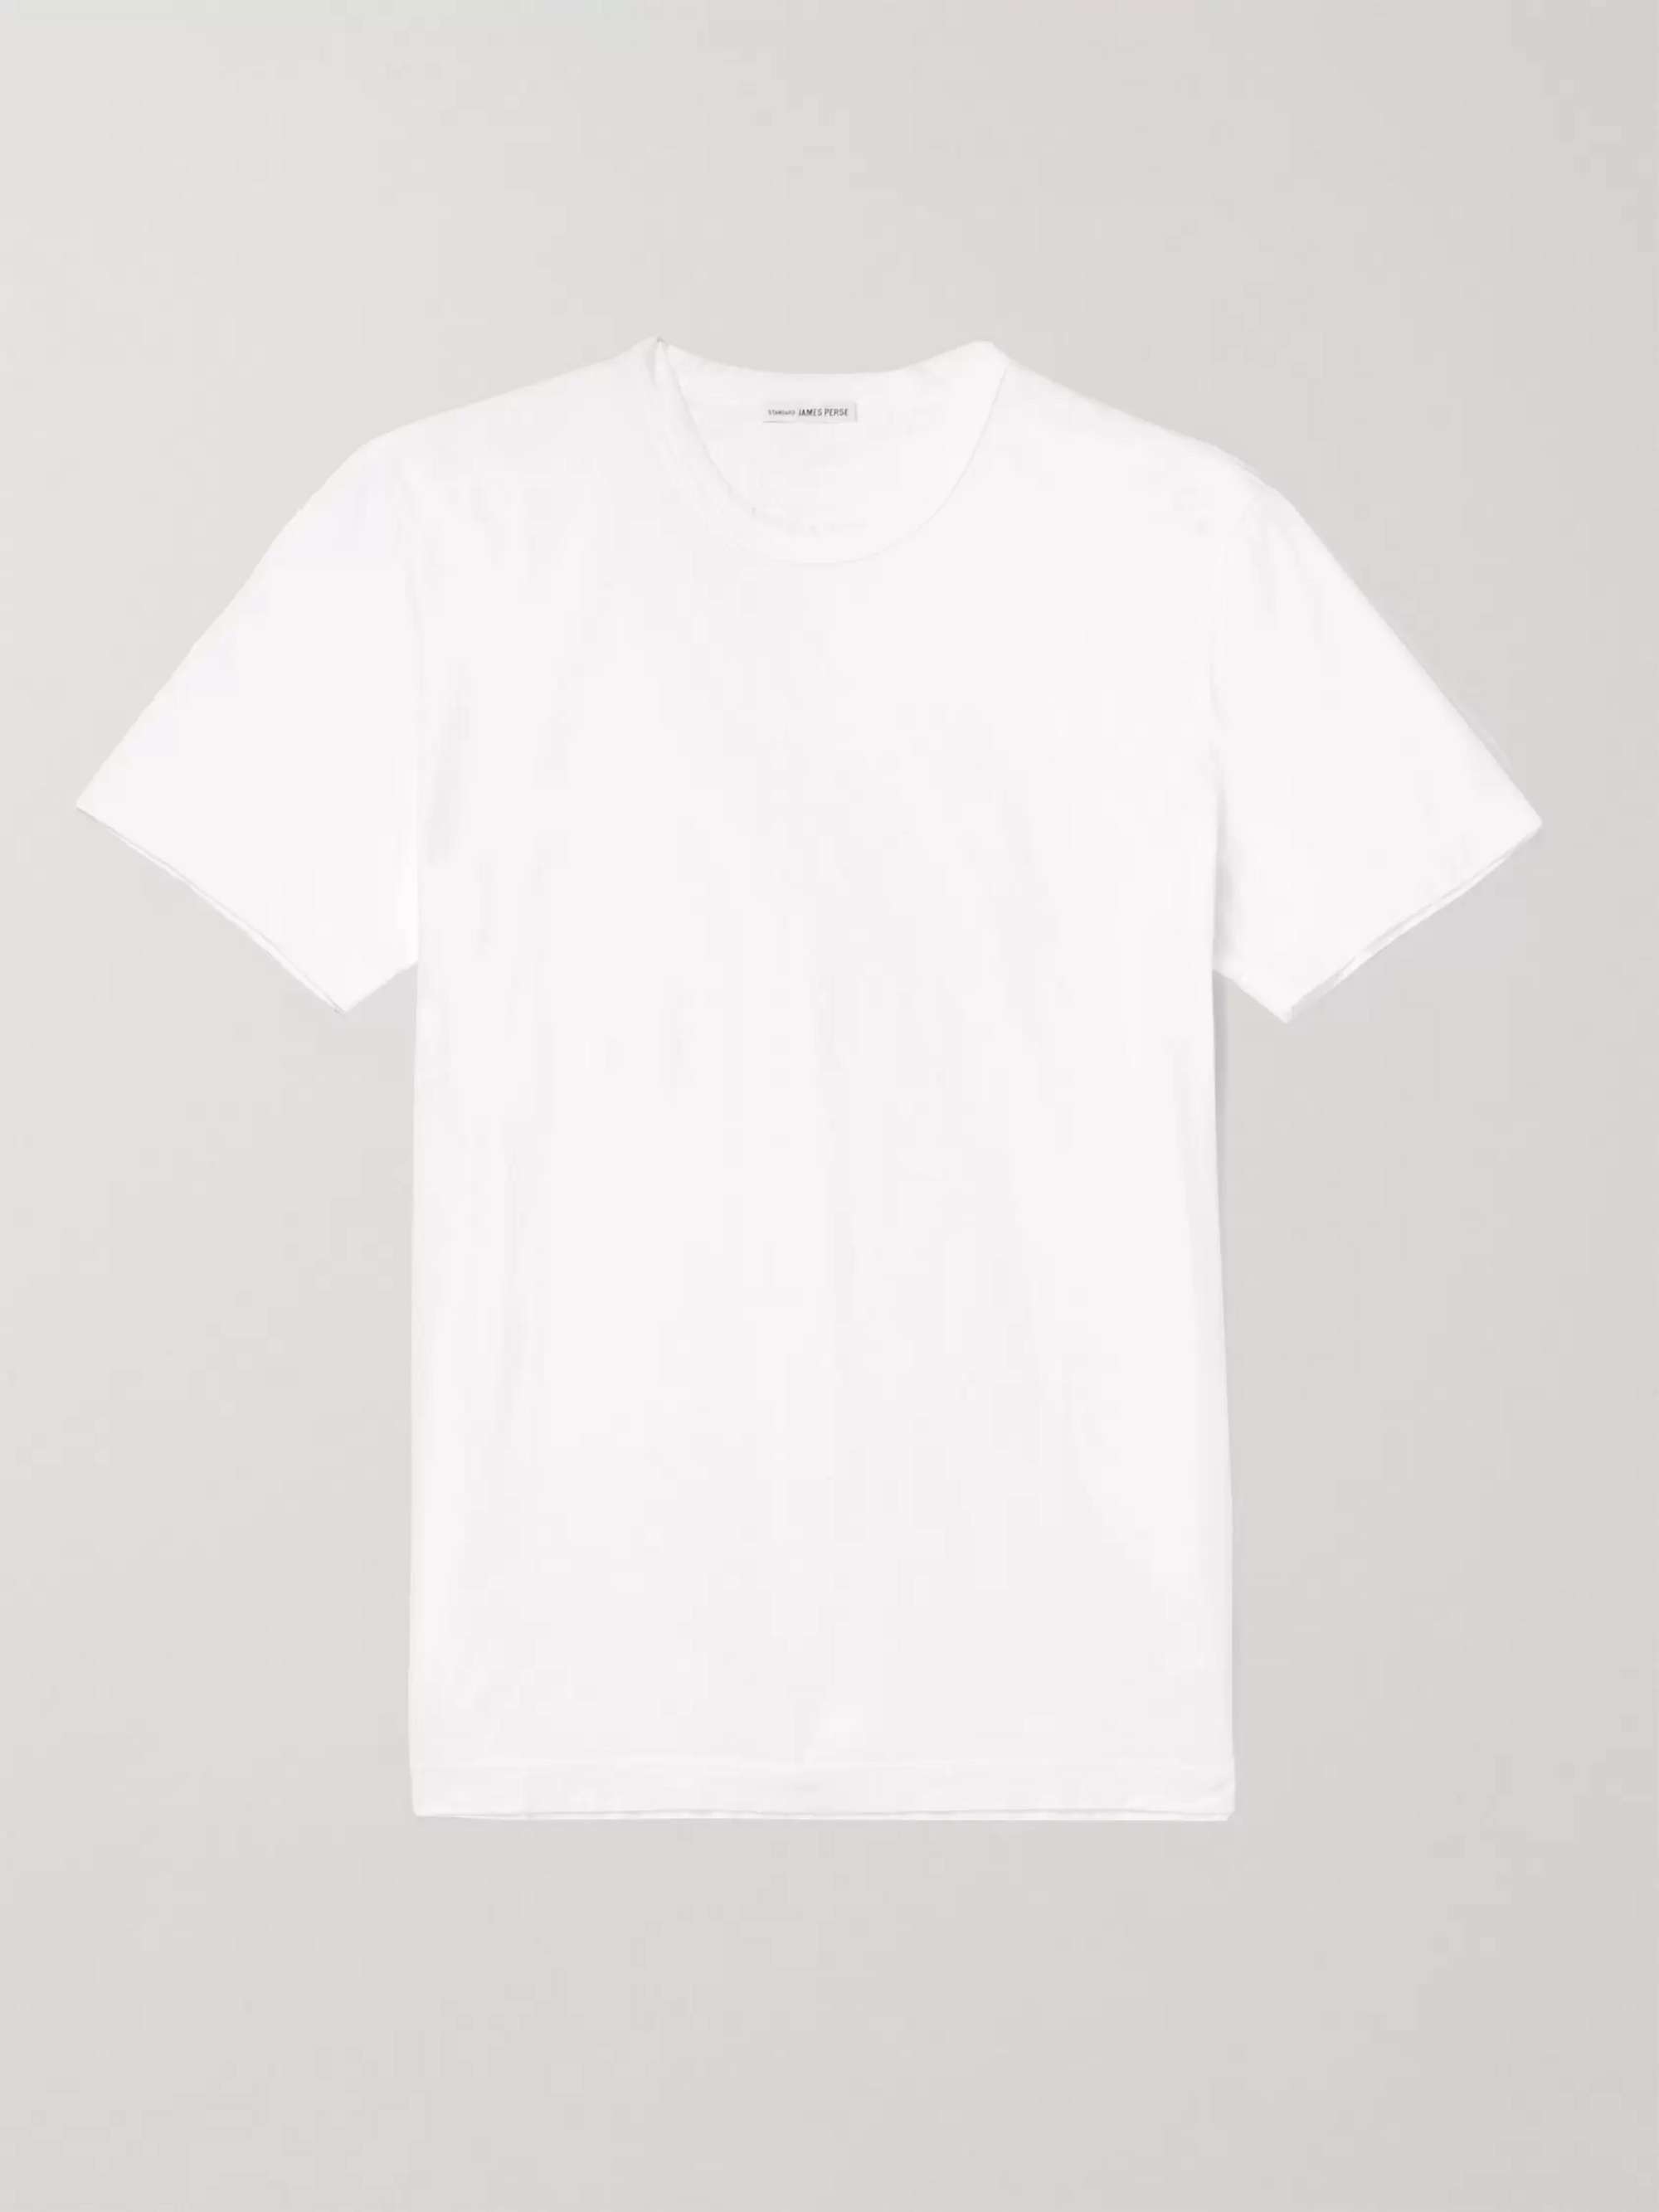 White Combed Cotton-Jersey T-Shirt | JAMES PERSE | MR PORTER